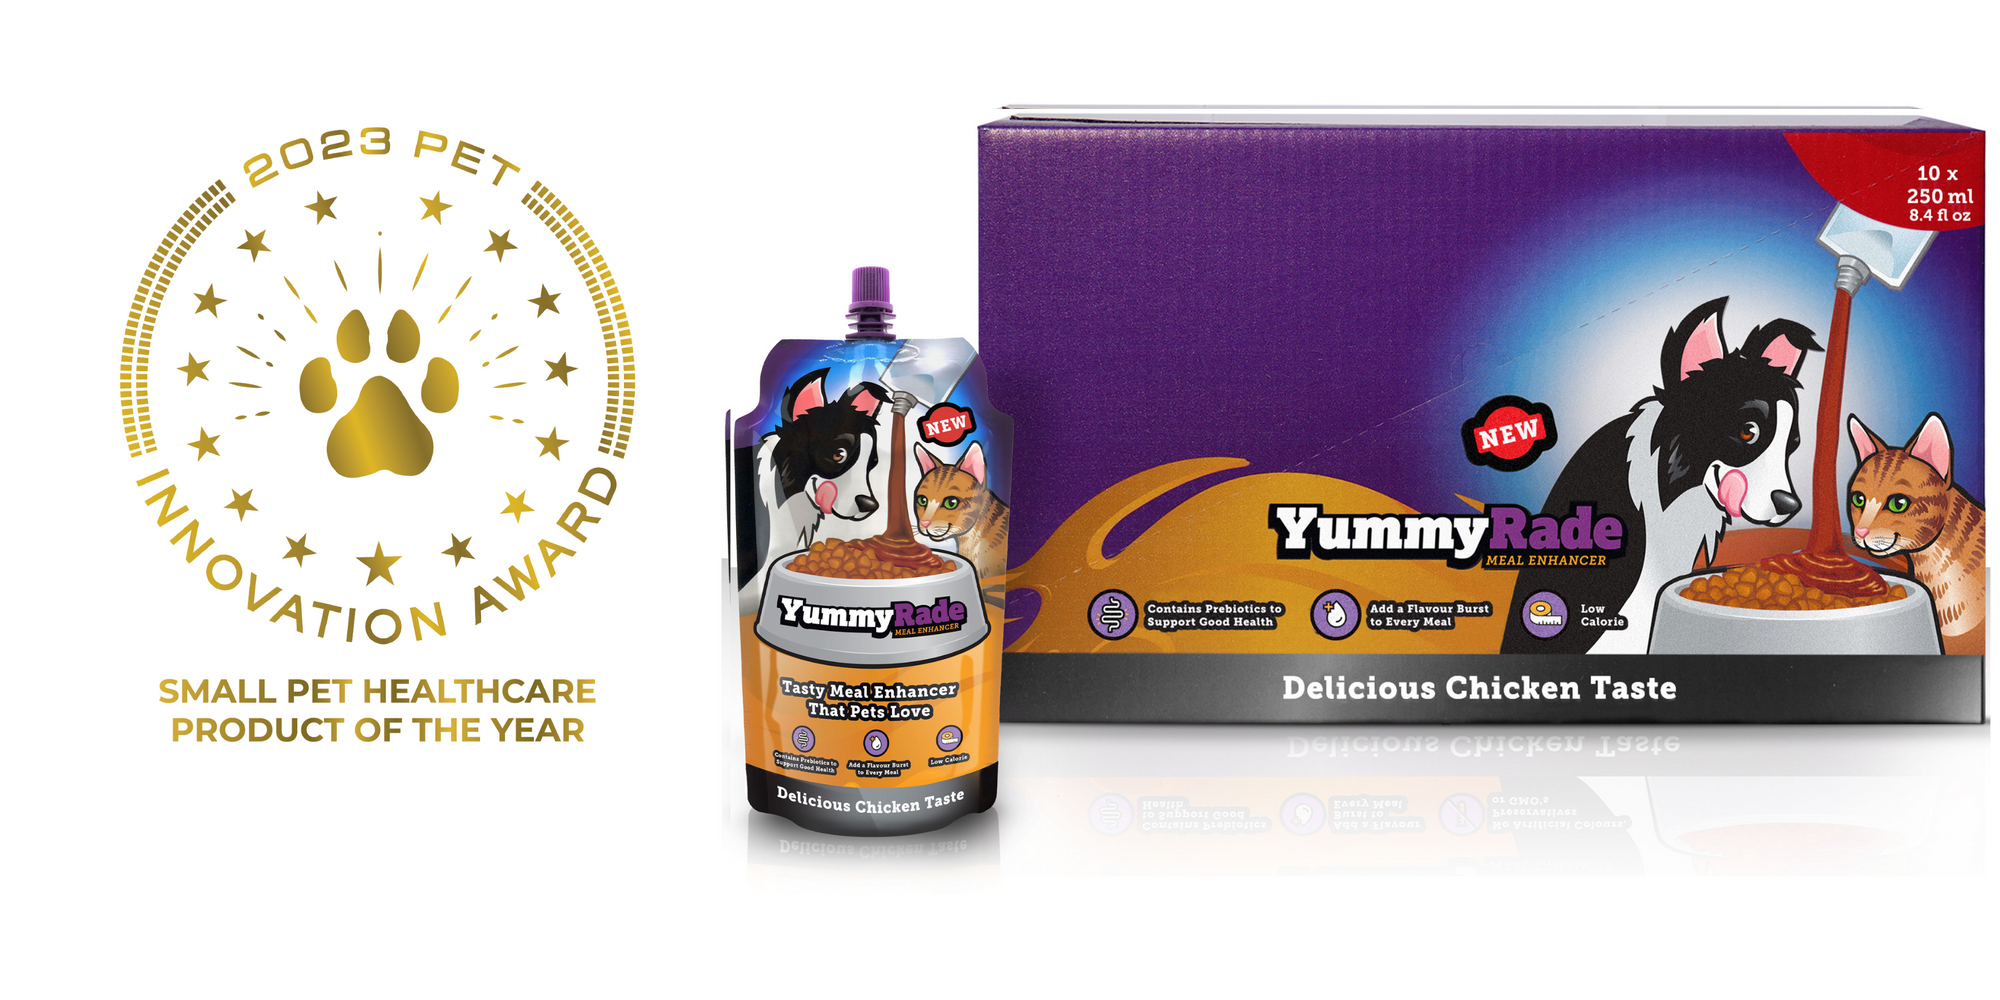 YummyRade takes home  "Small Pet Healthcare Product of the Year" at the Pet Innovation Awards!